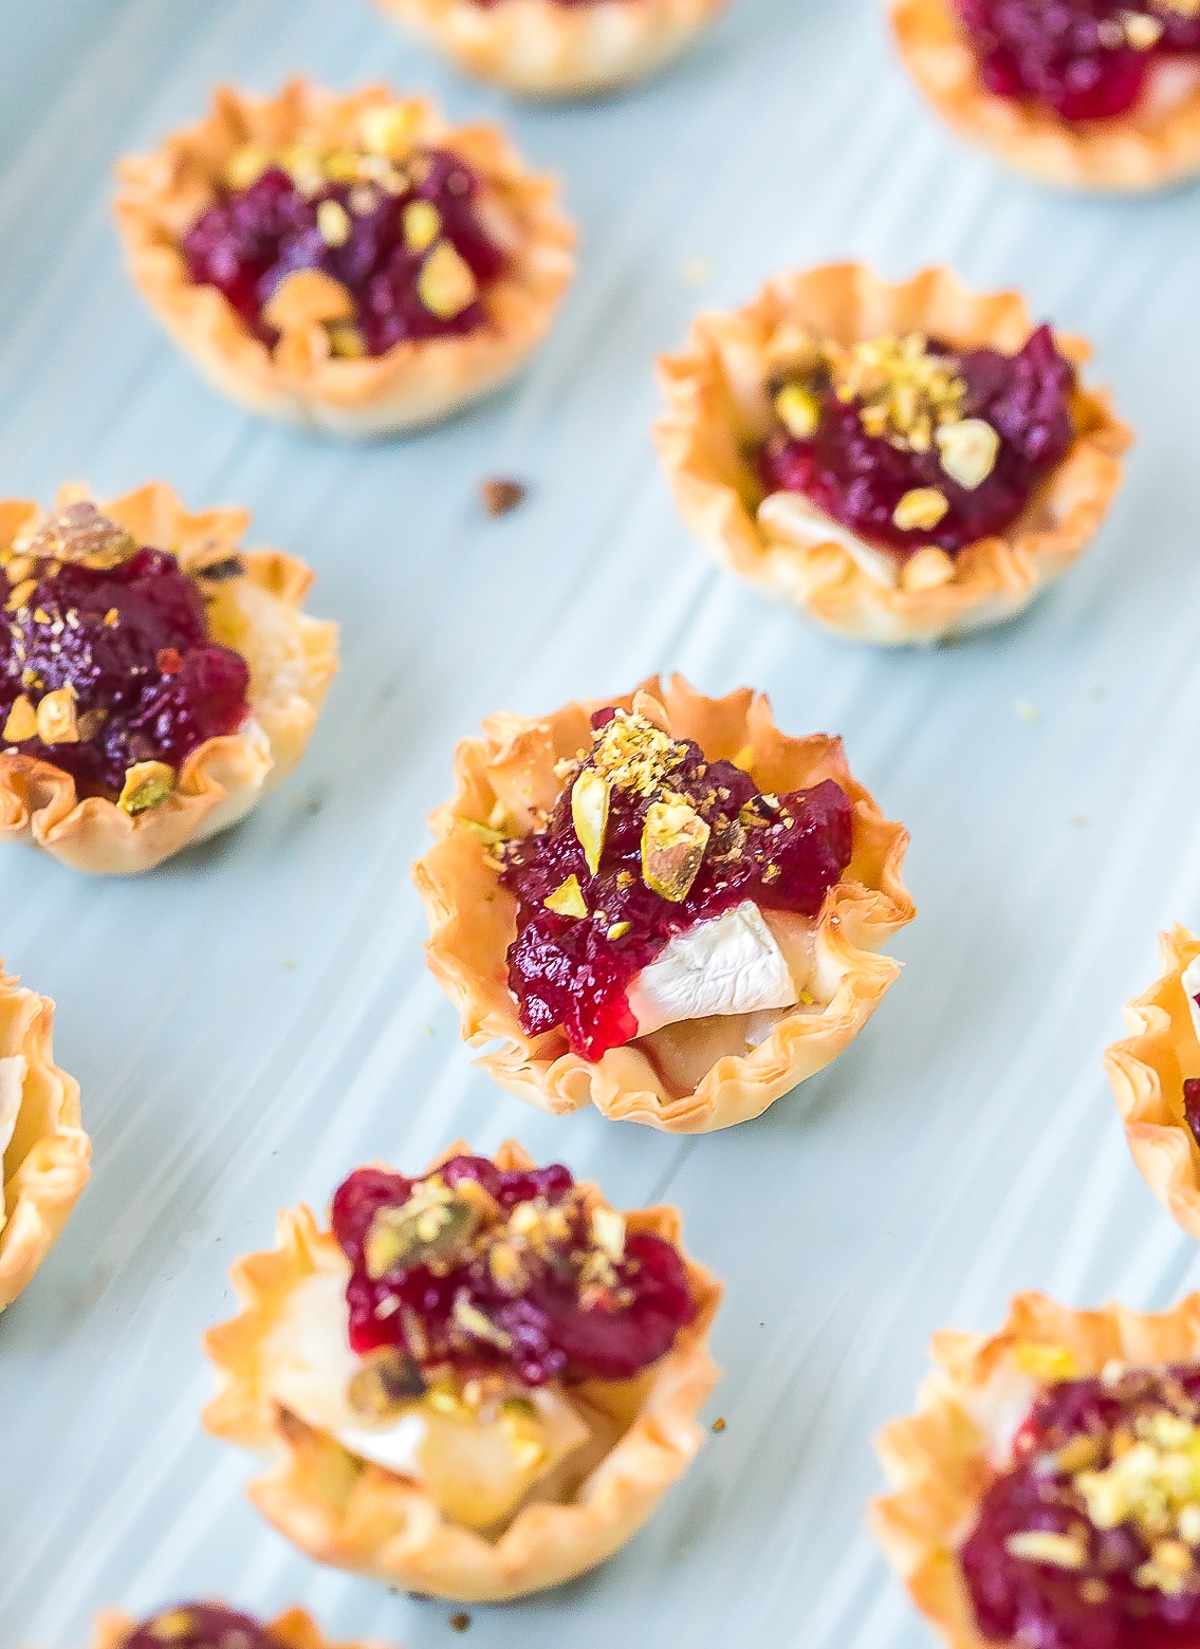 Mini Baked Brie Bites with Cranberry Sauce Recipe #ASpicyPerspective #brie #baked #cranberry